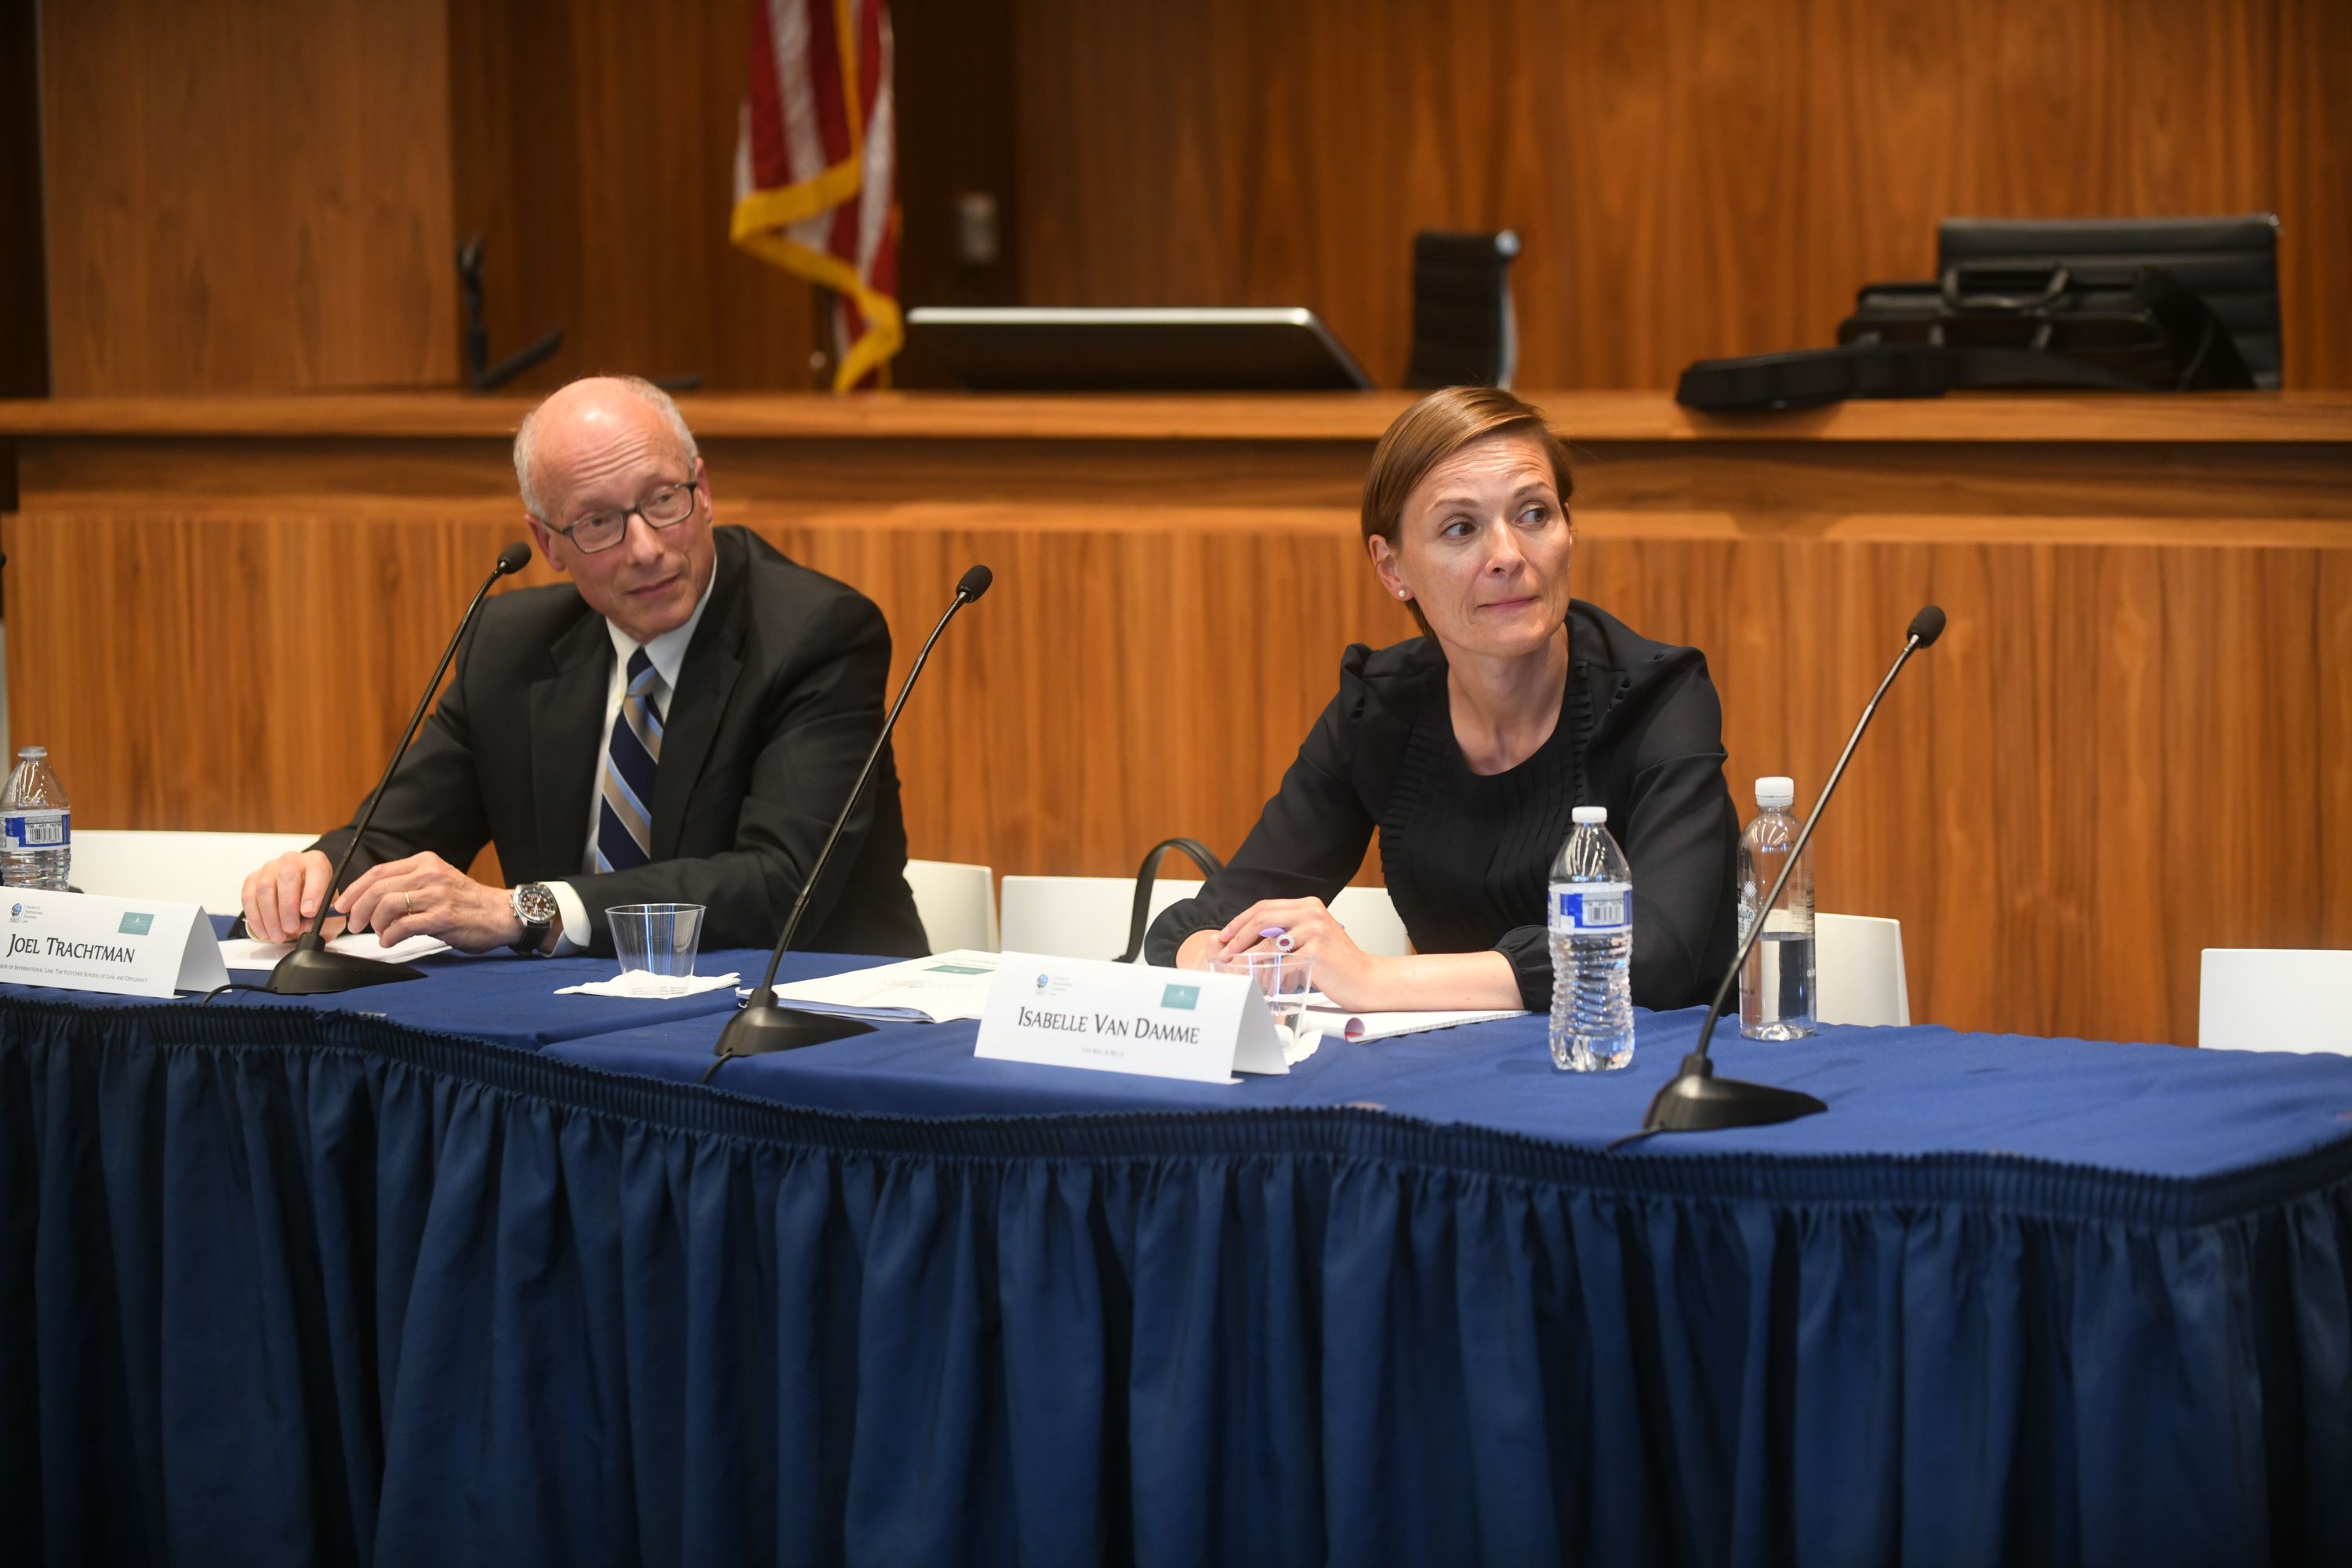 The Robert Hudec Lecture:“The Robert Hudec Legacy: Trade, Domestic Regulation, and Globalization”, delivered by Joel Trachtman, Professor of International Law, The Fletcher School of Law and Diplomacy, and moderated by  Isabelle Van Damme of Van Bael & Bellis.